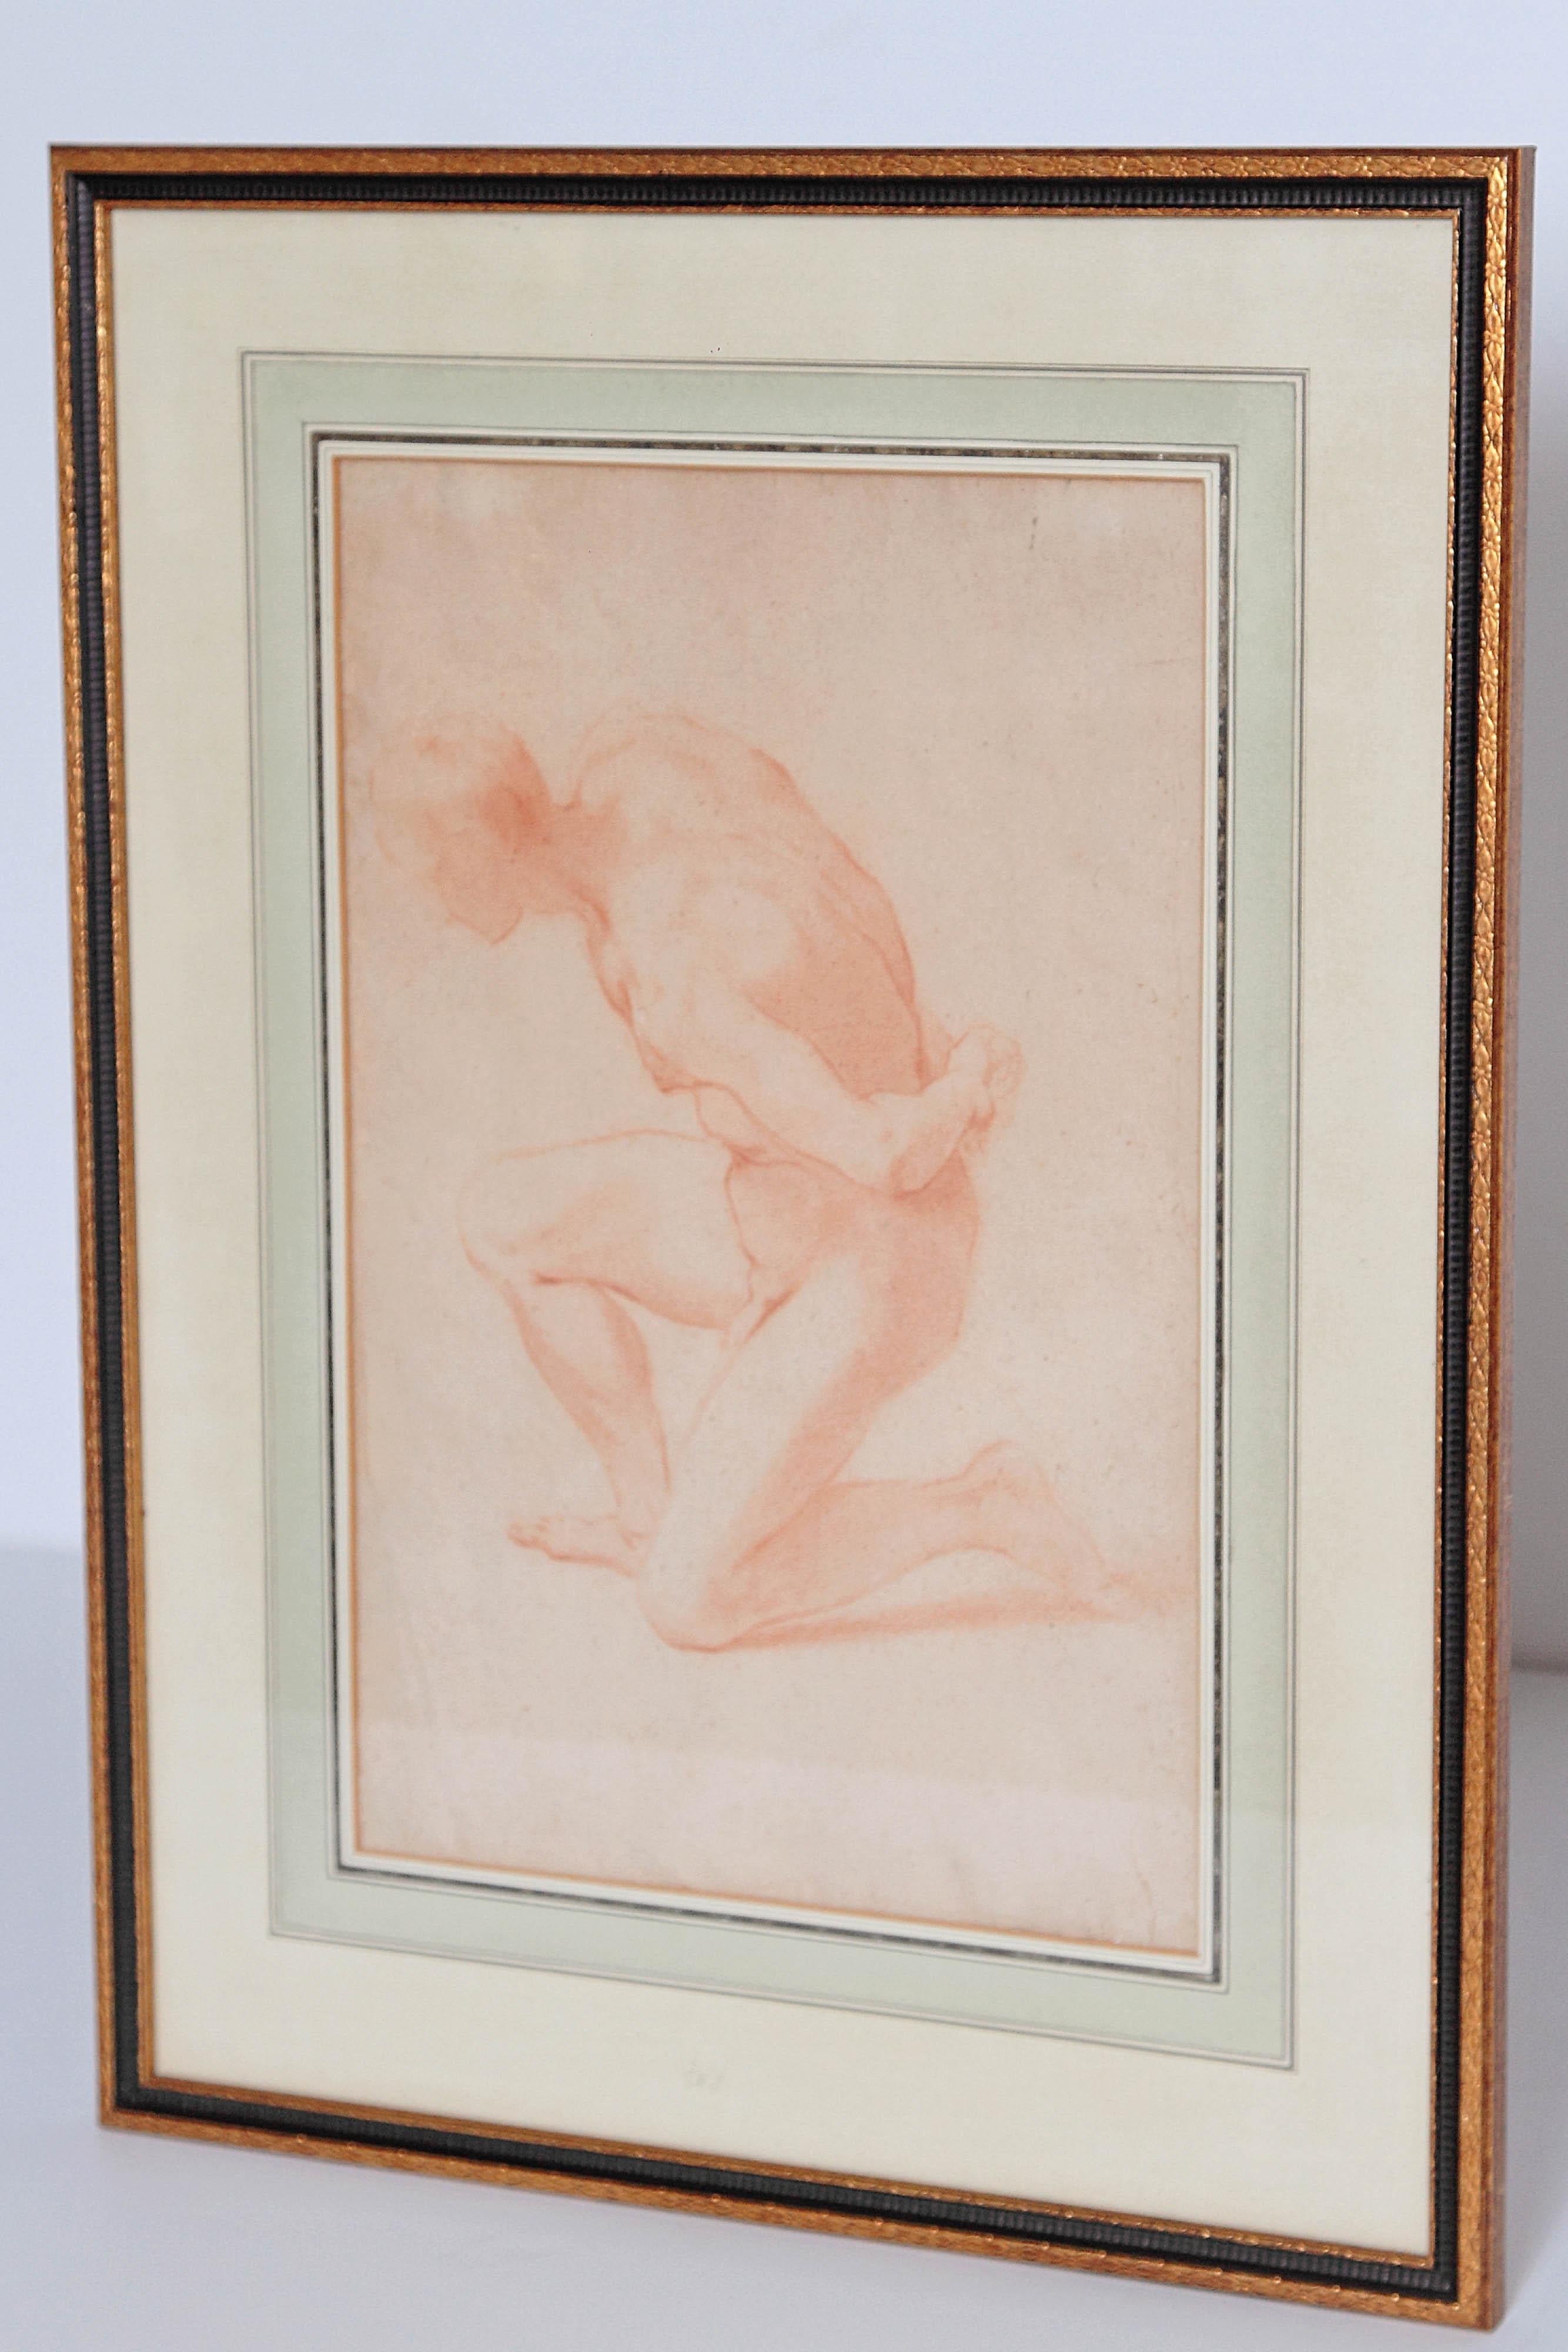 Paper 19th Century Continental Red Chalk Drawing, Figure Study